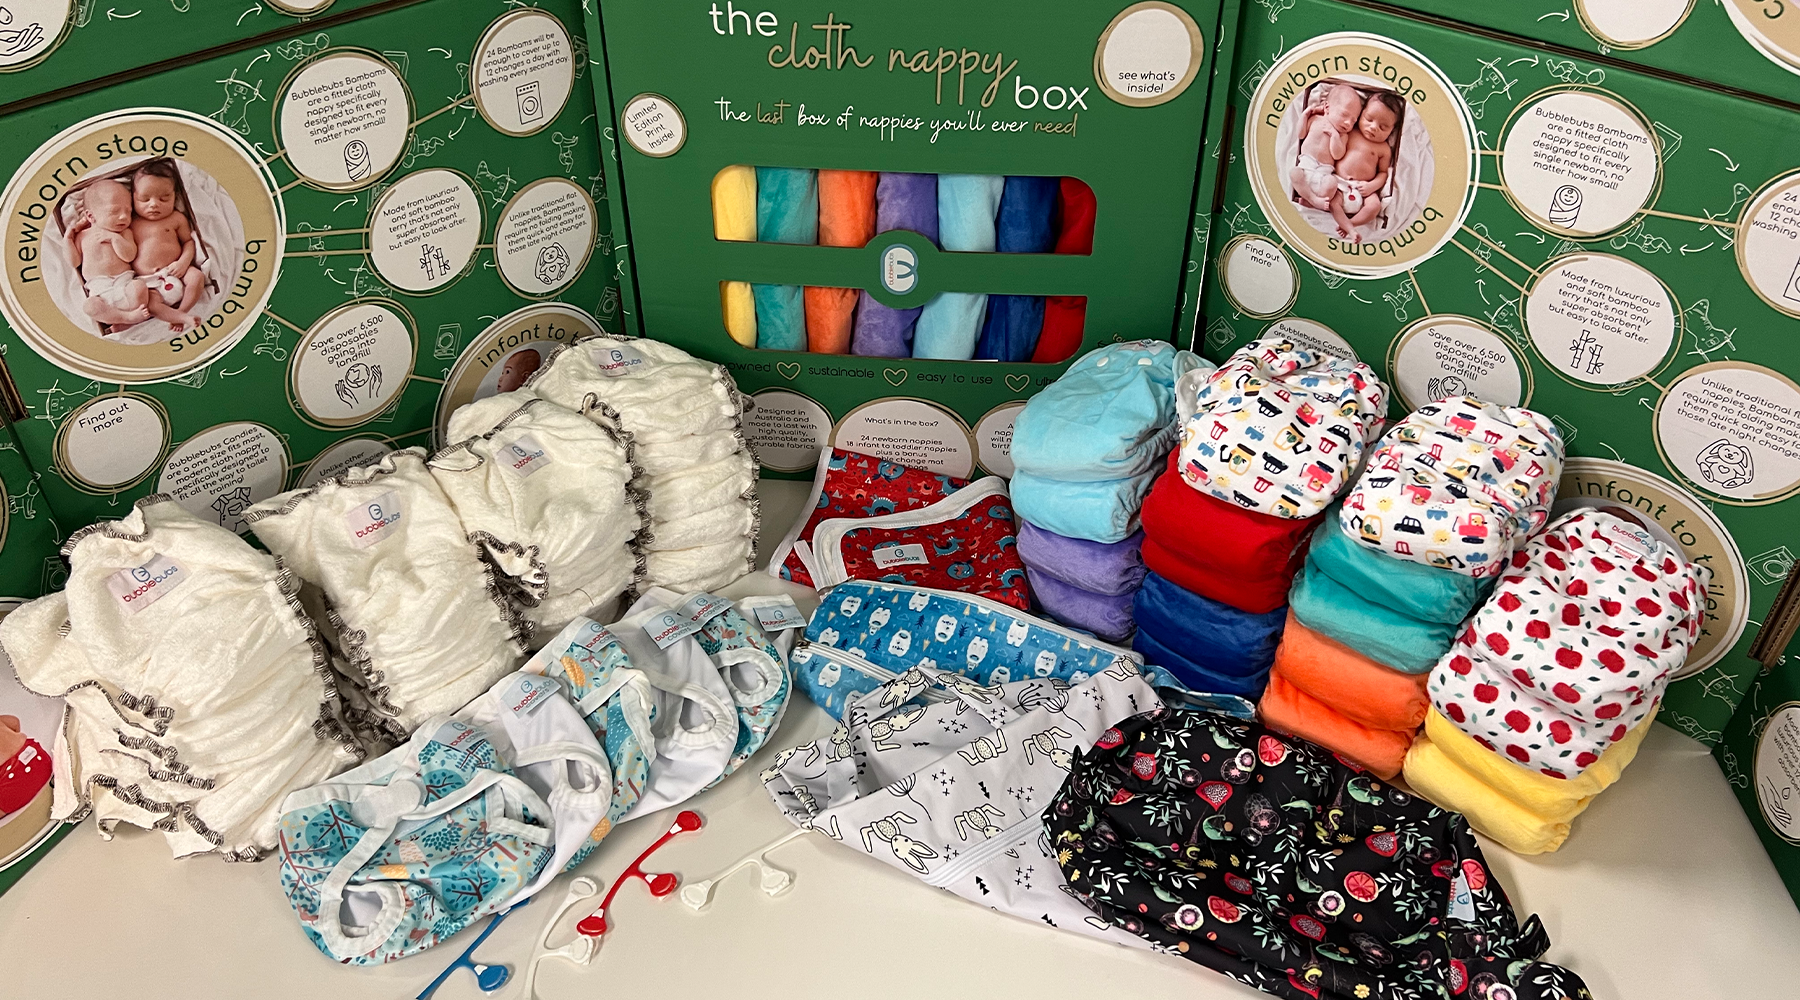 All the cloth nappies you need are in this one box. You will not need to buy more reusable diapers for not only your first child but up to 3. 